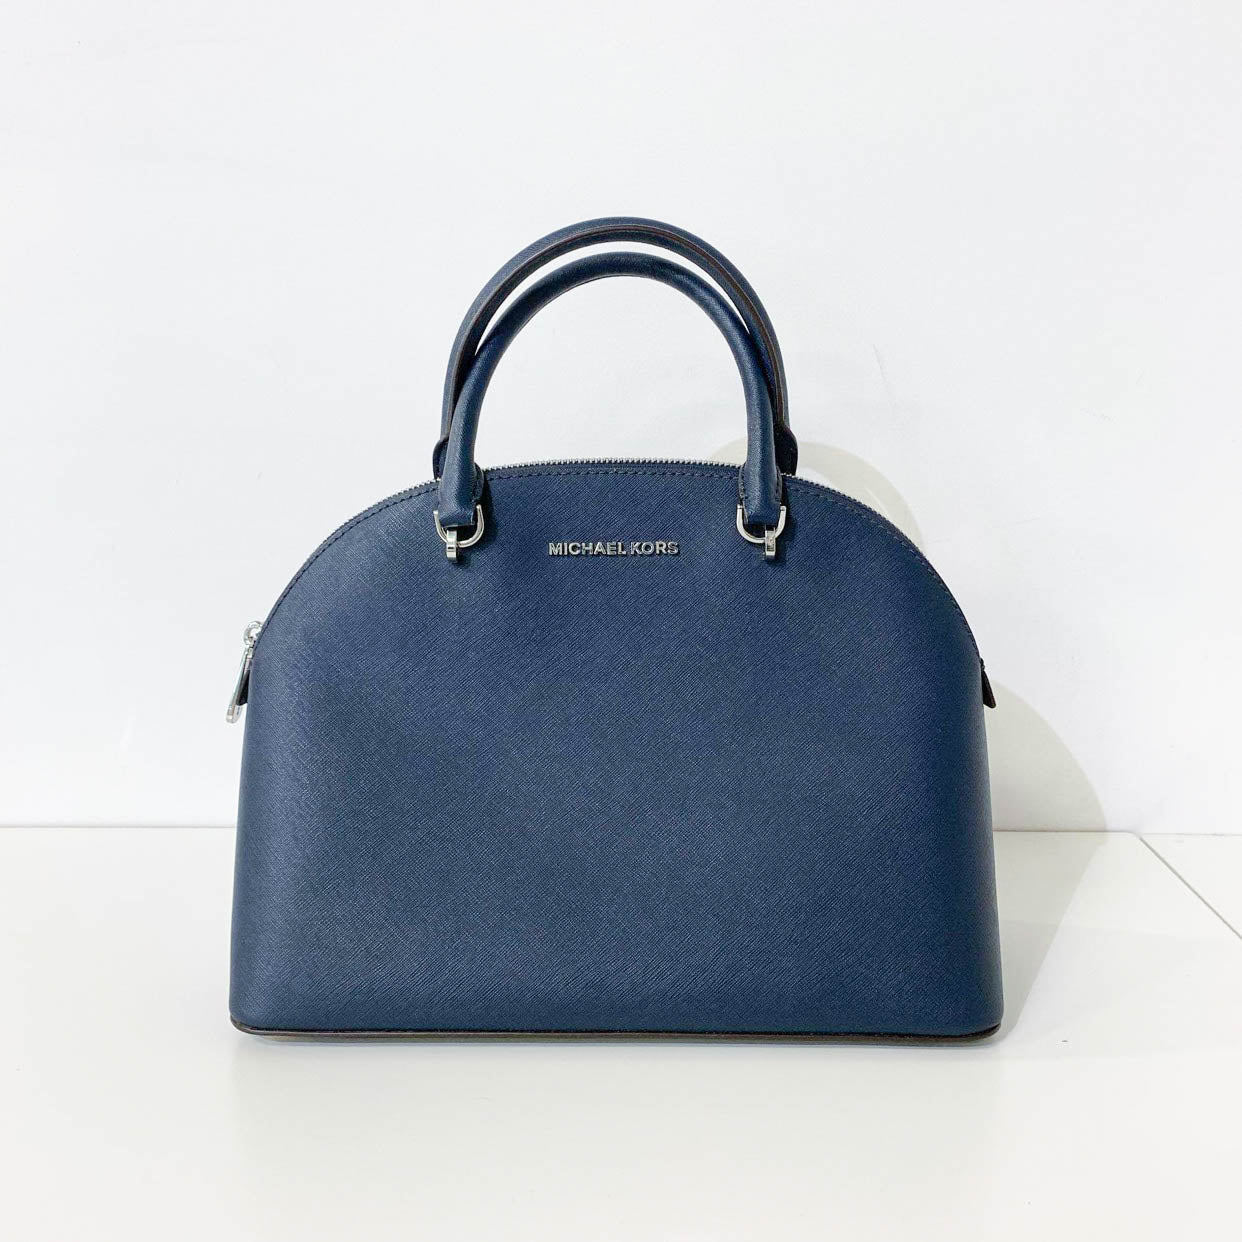 Navy Saffiano Leather Top Handle Bag